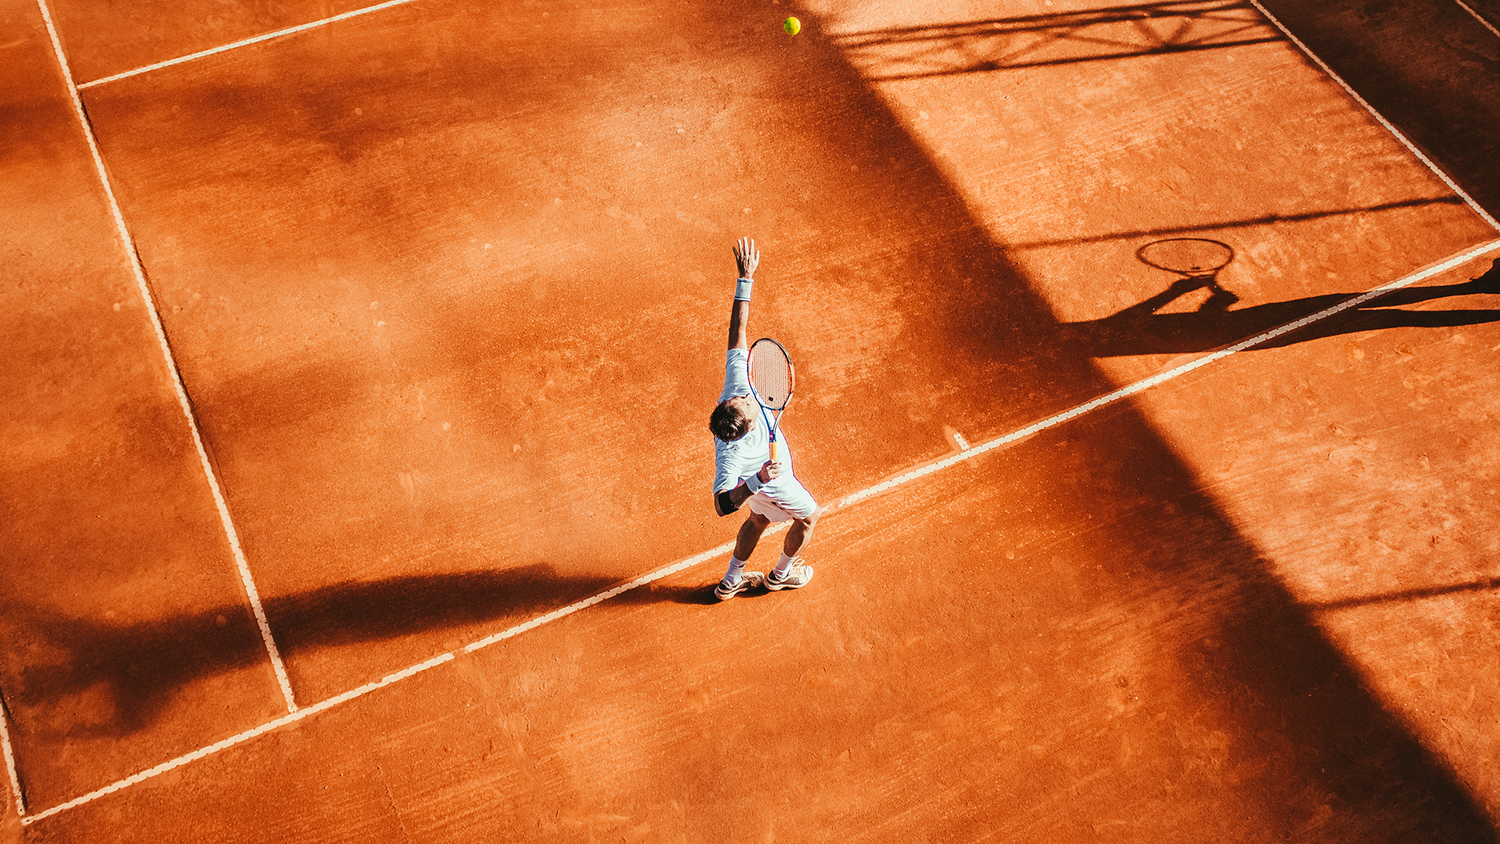 5 Key Exercises For Tennis Players